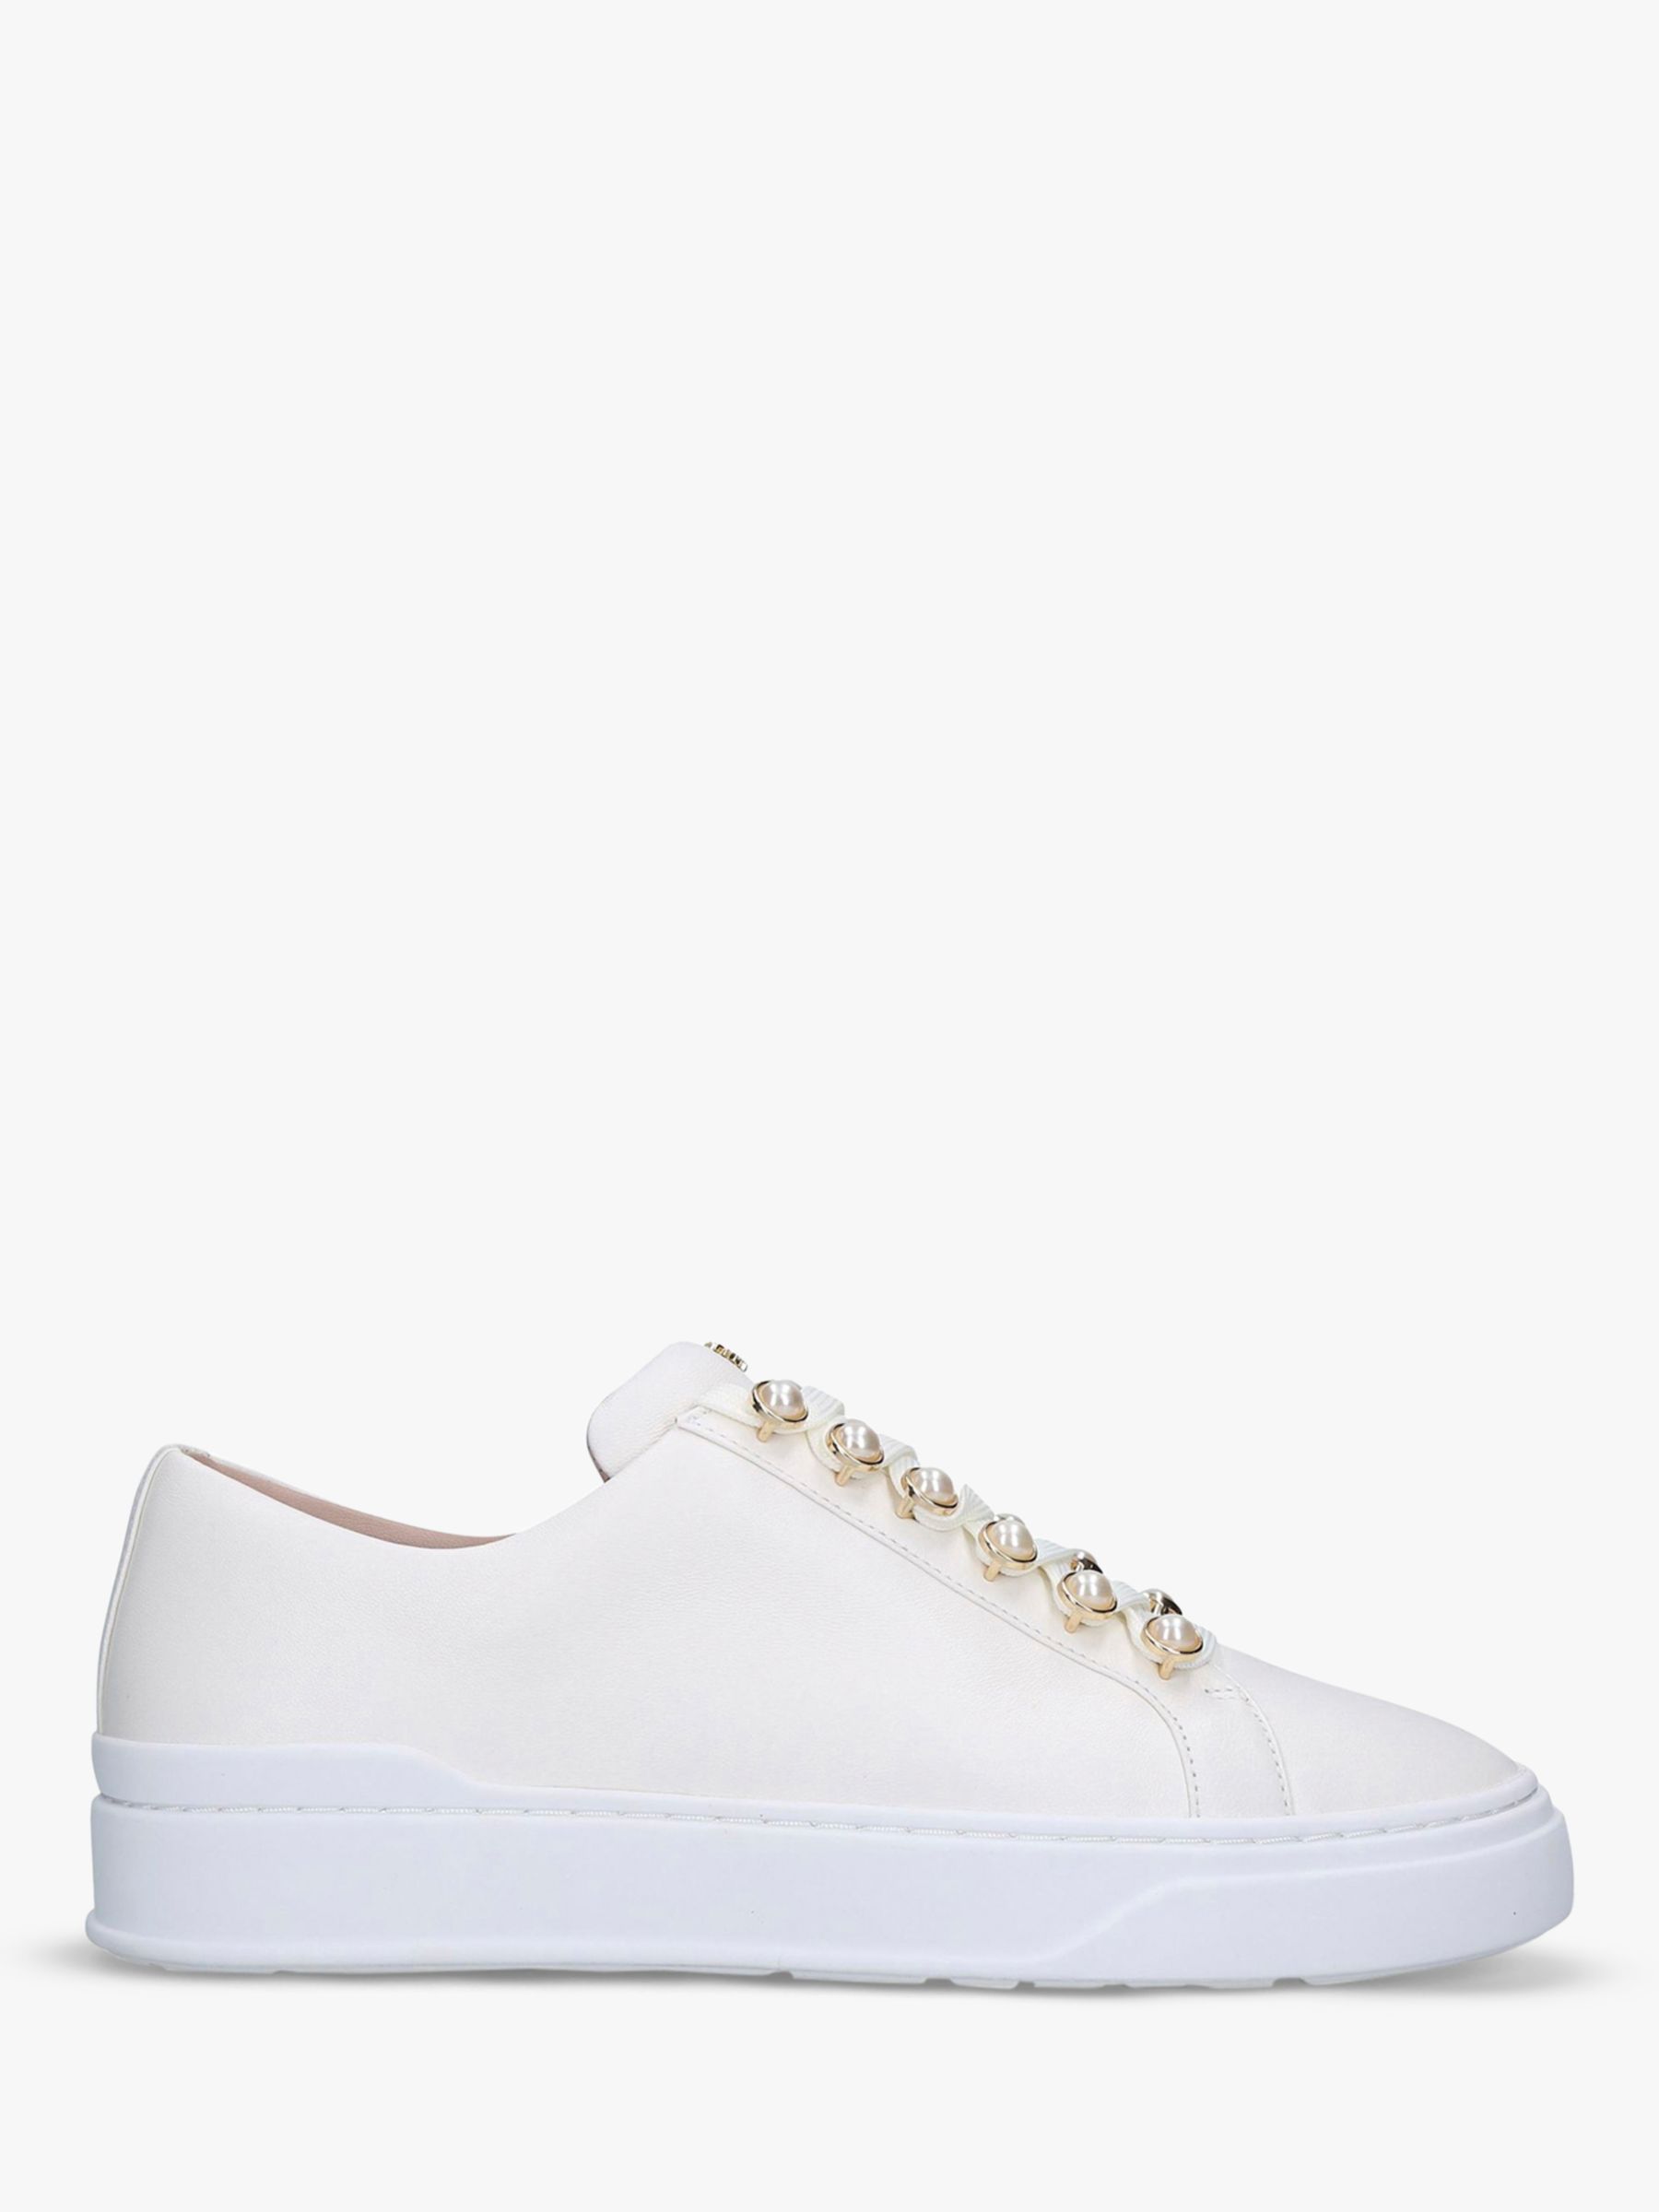 Stuart Weitzman Excelsa Low Top Leather Trainers, White at John Lewis ...